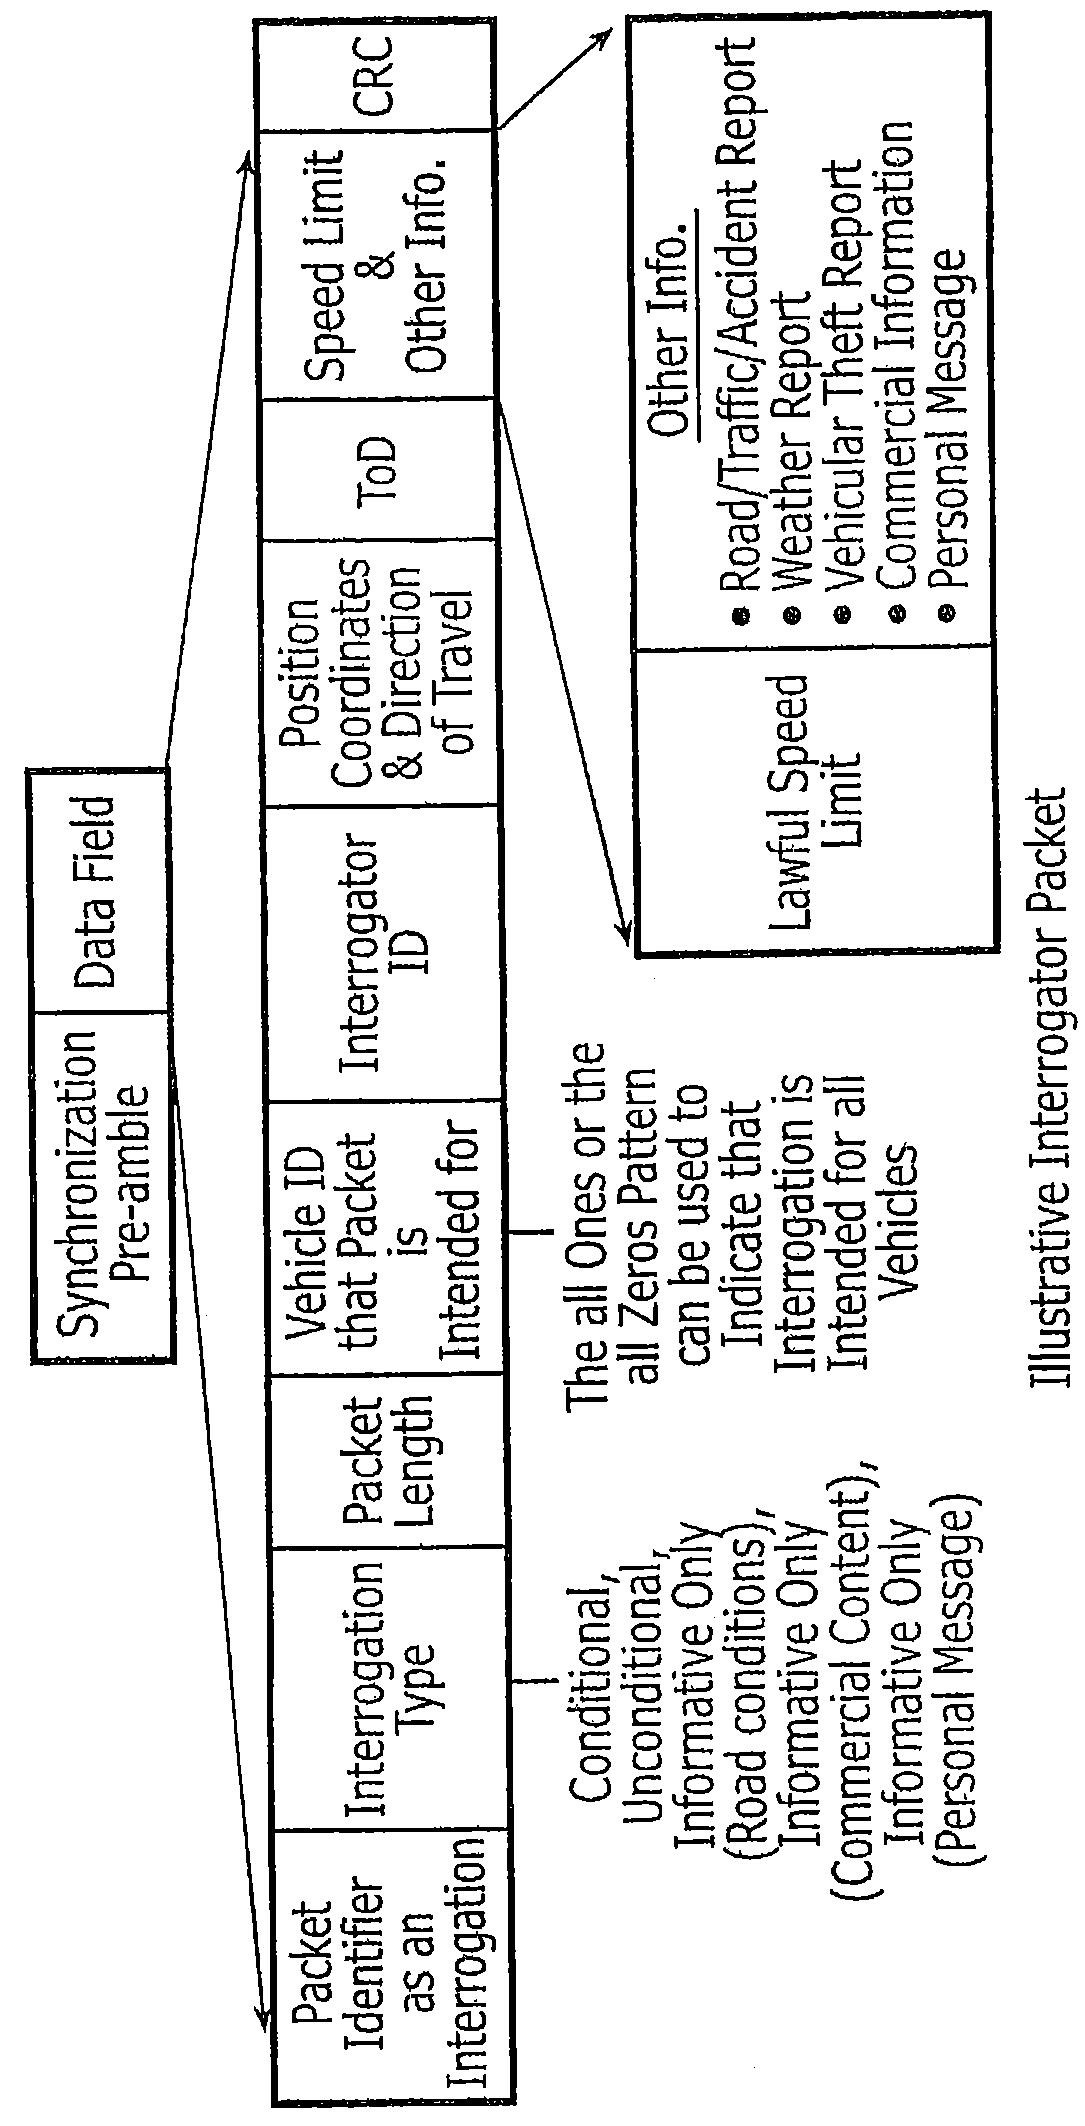 Systems and/or methods of data acquisition from a transceiver